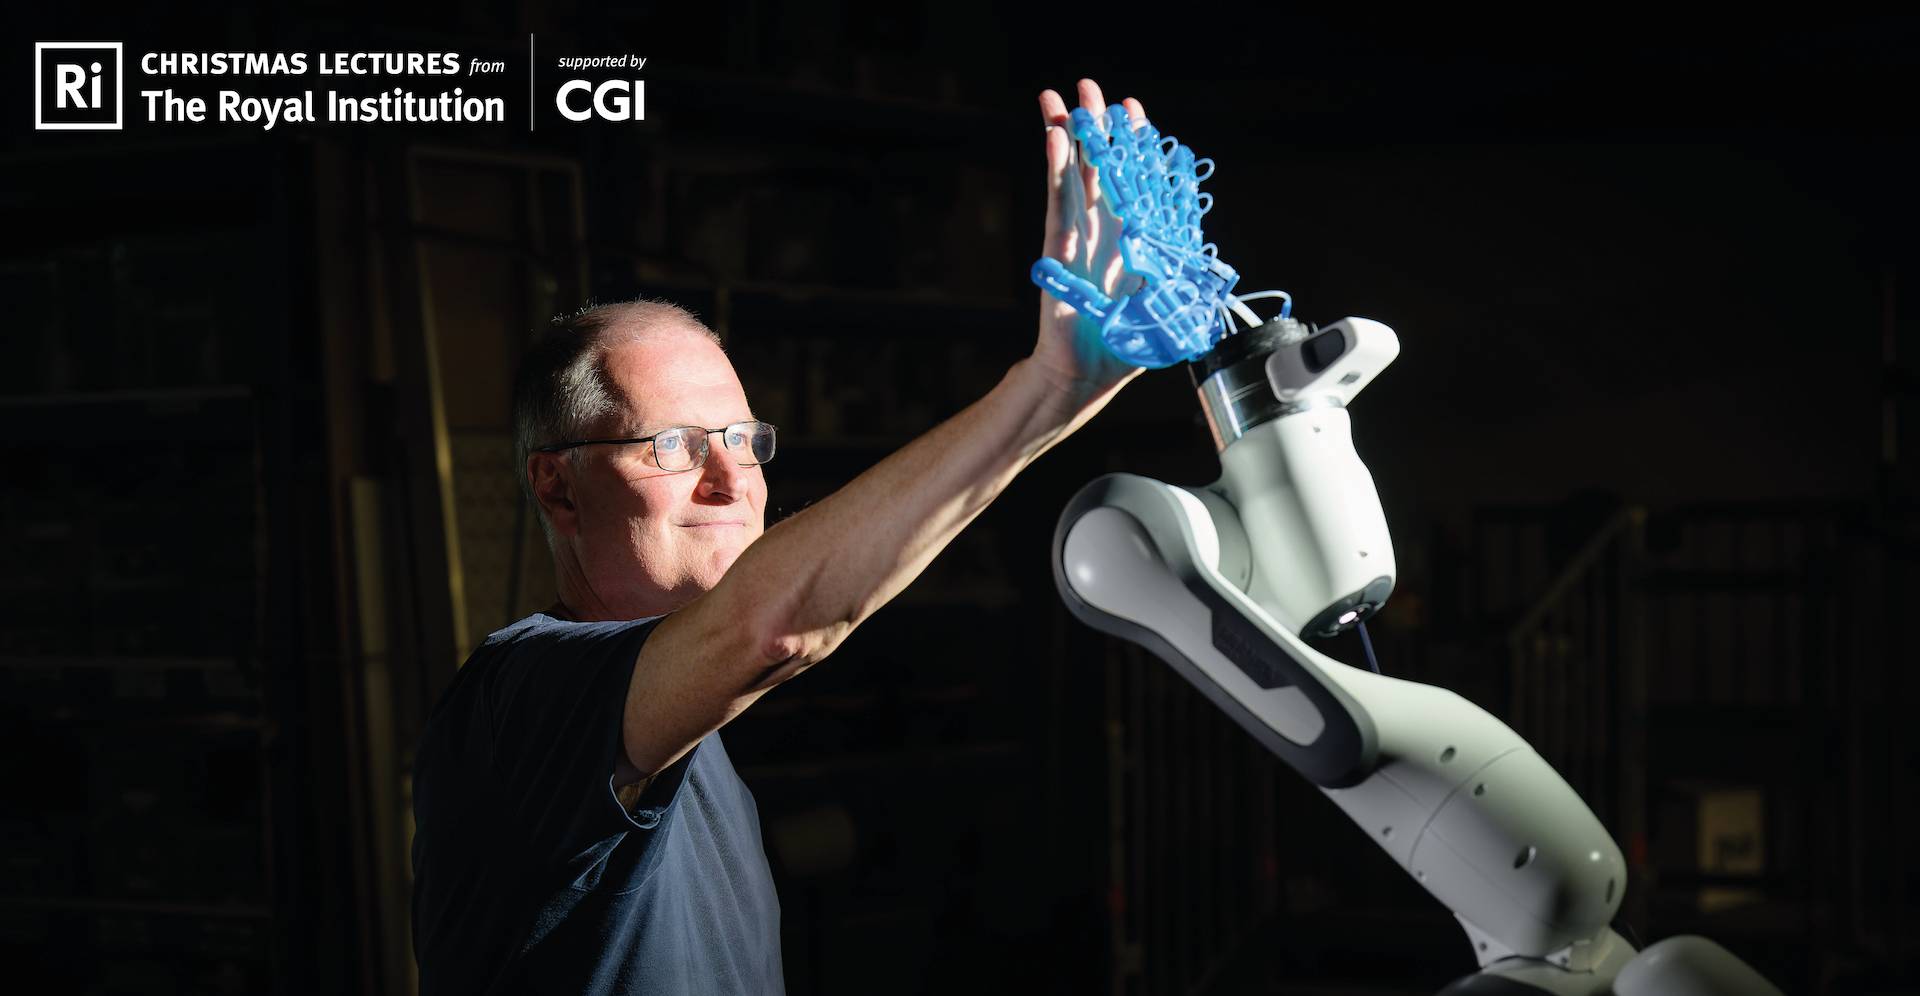 Promotional image for Royal Institute Christmas lectures showing man reaching to robot arm